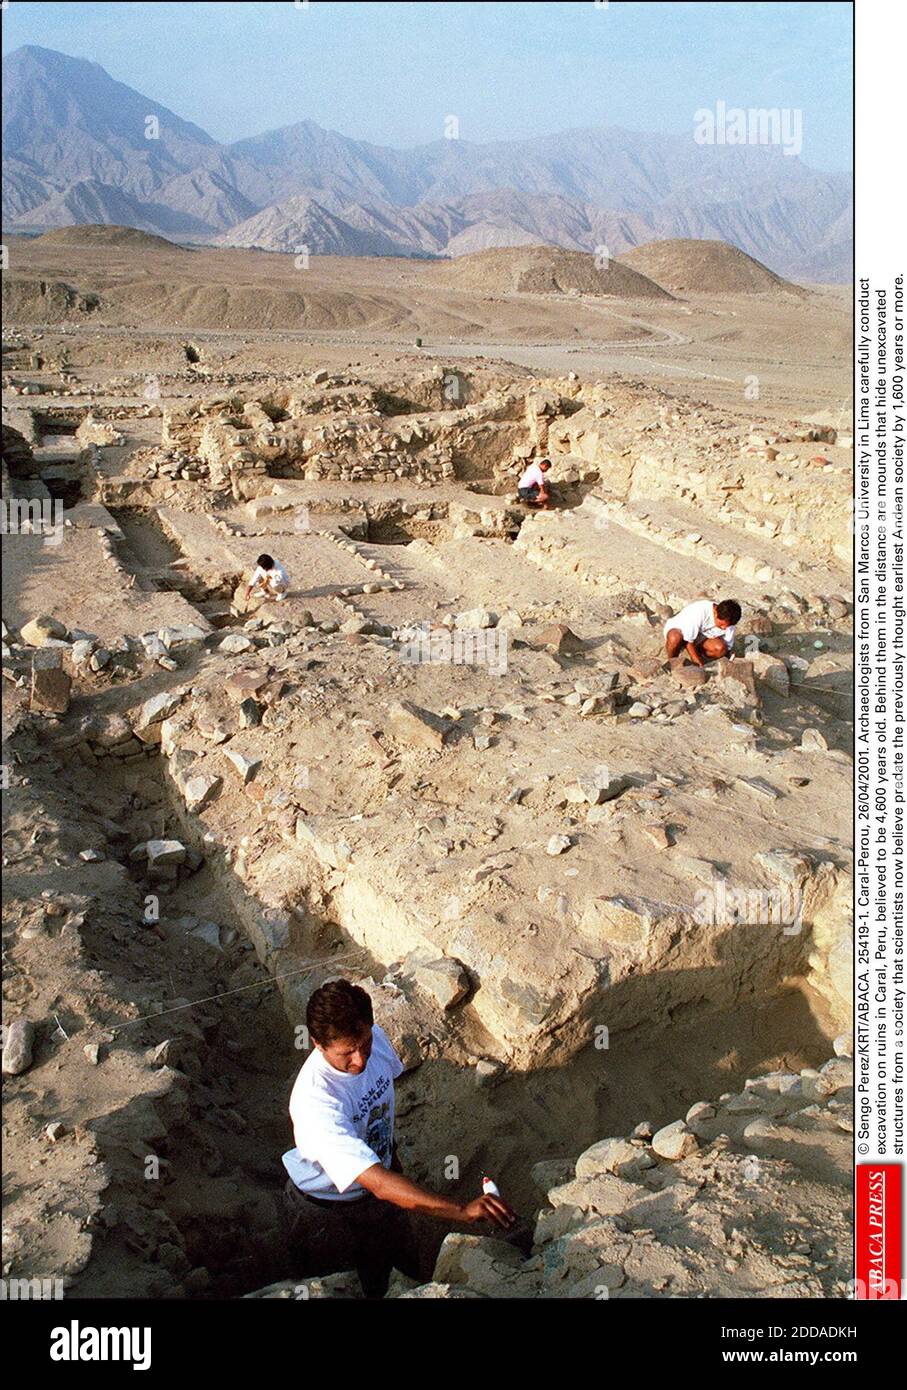 NO FILM, NO VIDEO, NO TV, NO DOCUMENTARY - © Sengo Perez/KRT/ABACA. 25419-1. Caral-Perou, 26/04/2001. Archaeologists from San Marcos University in Lima carefully conduct excavation on ruins in Caral, Peru, believed to be 4,600 years old. Behind them in the distance are mounds that hide unexcavated Stock Photo